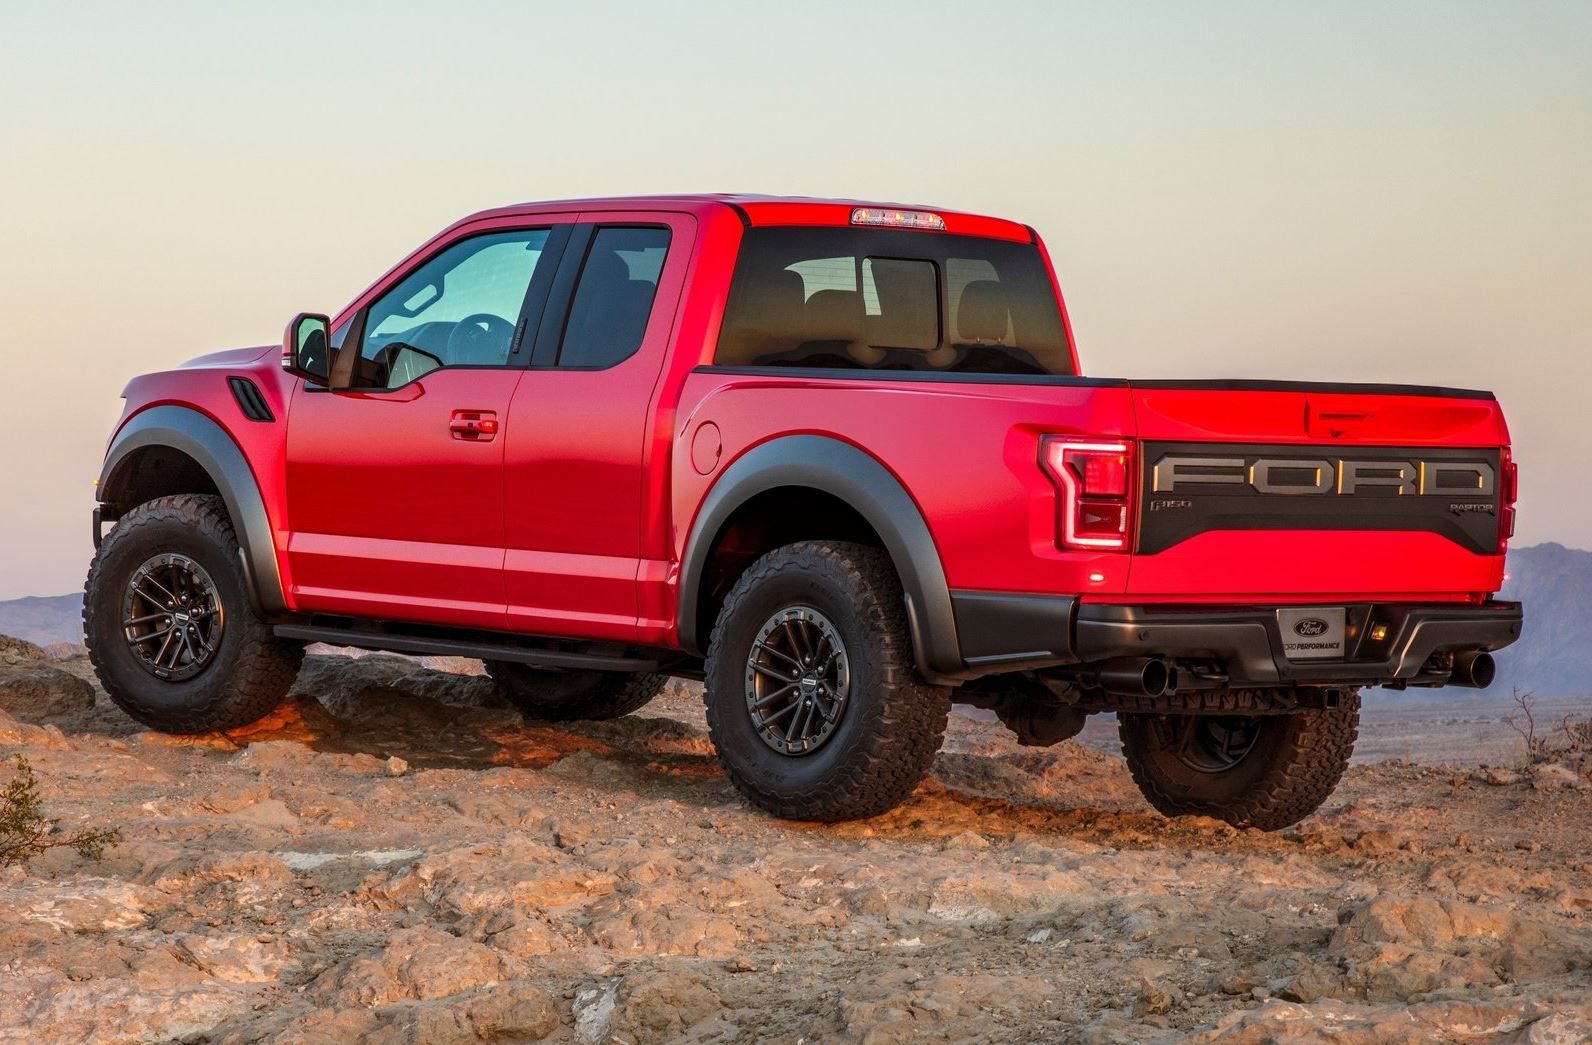 The 2019 Ford F-150 Can Take Care Of Any Job and Any Passenger